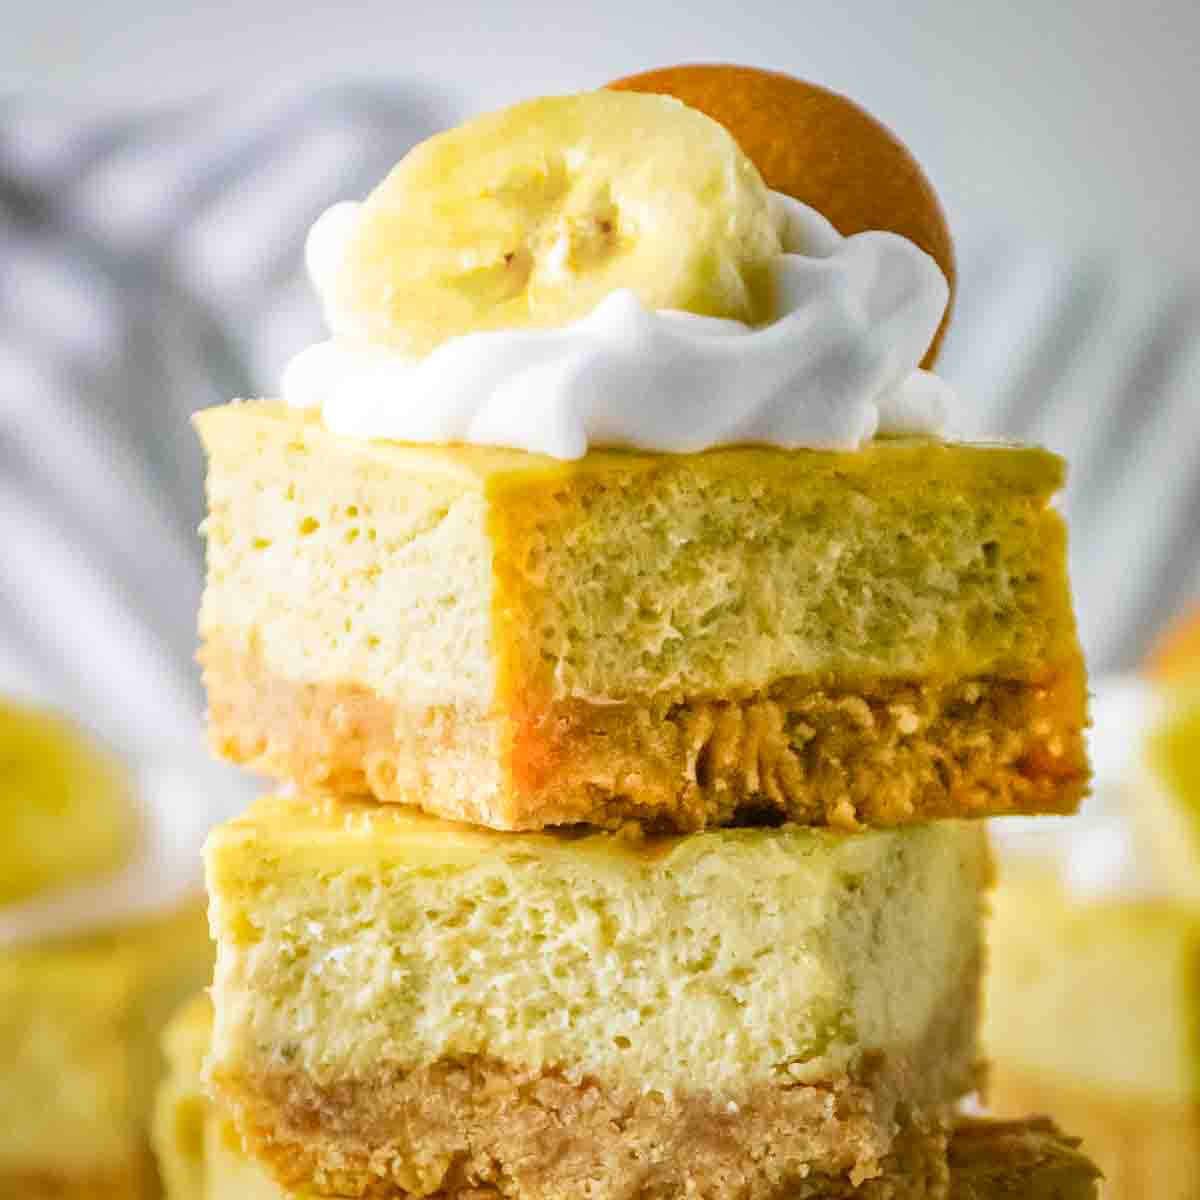 Close up shot of two cheesecake bars stacked on each other garnished with whipped cream, a banana slice, and a vanilla wafer.